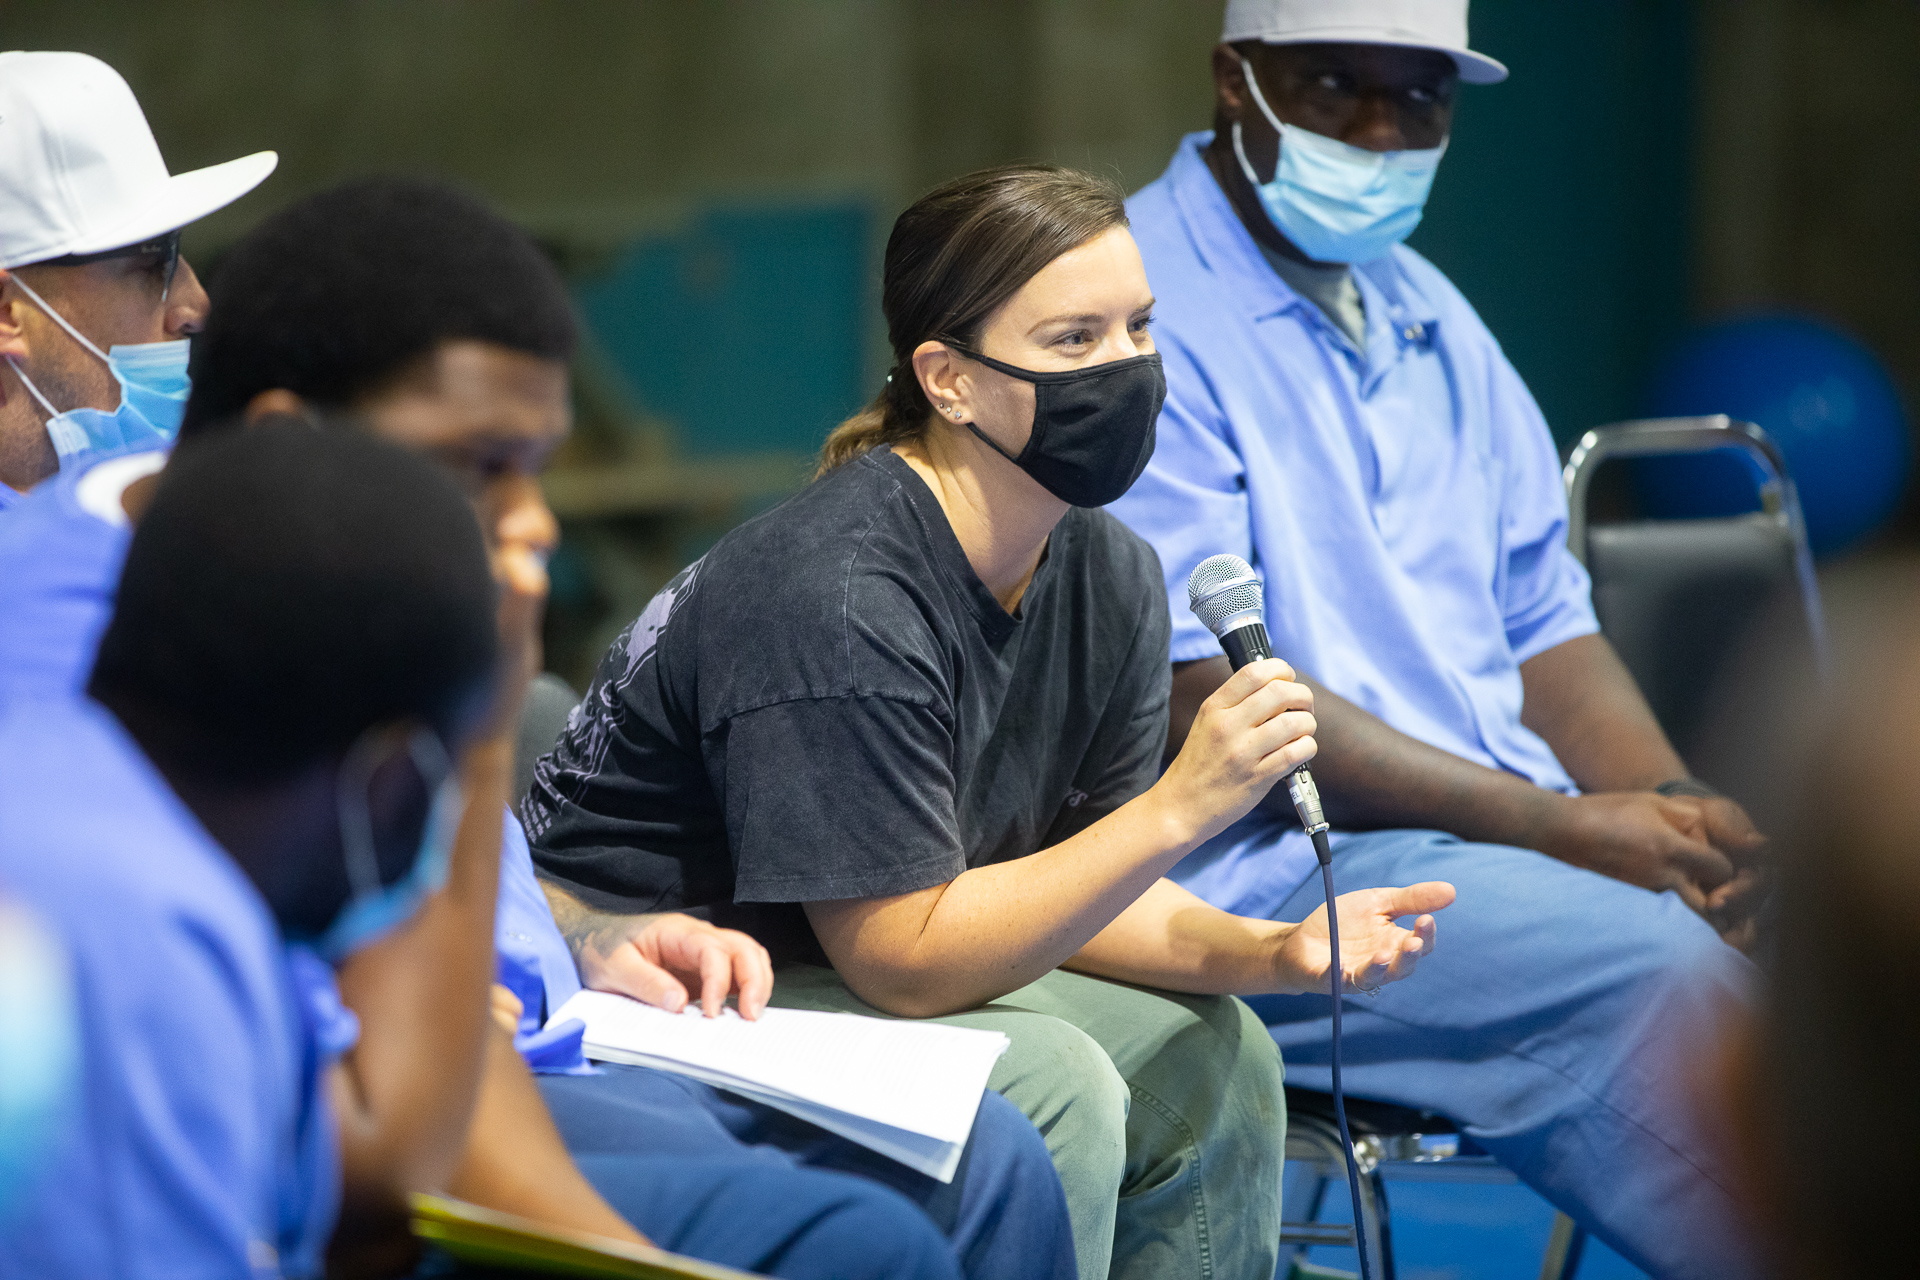 Dressed in a black top and green bottoms, a graduate student in Social Work who is part of the restorative justice group speaks to inmates via microphone during a workshop session at Folsom Prison.